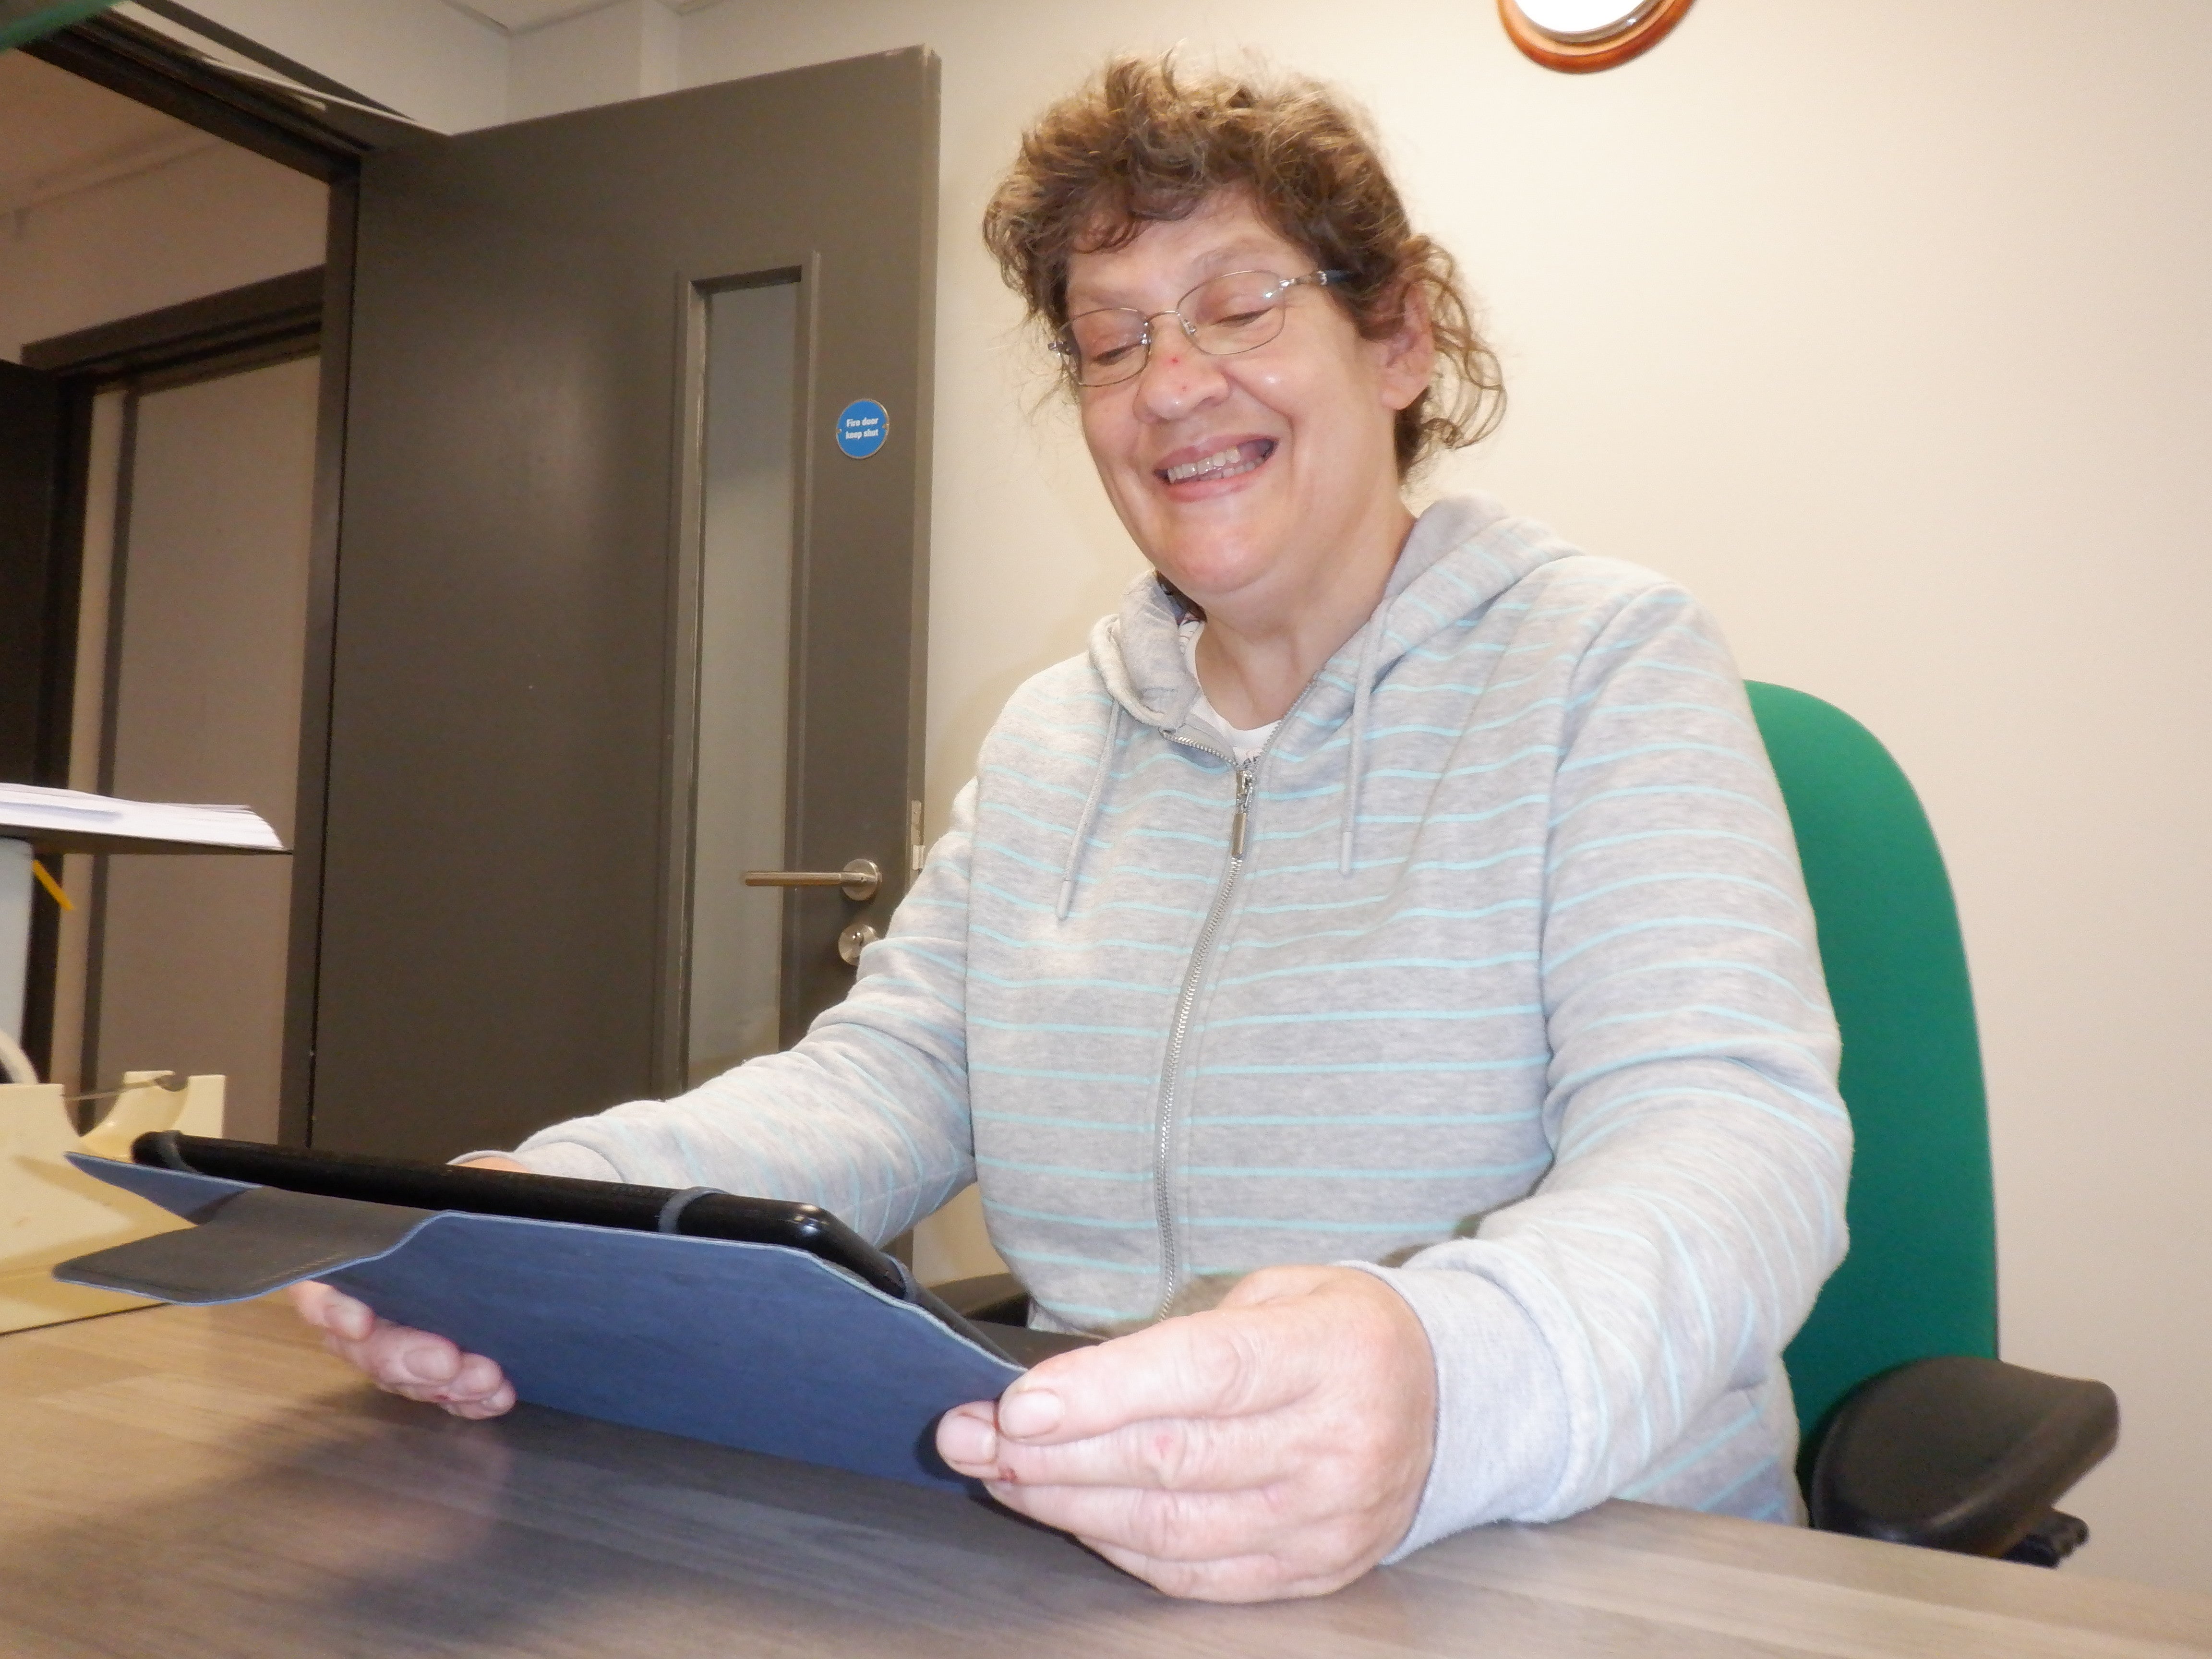 Carol sitting at a desk holding a tablet and smiling to the camera